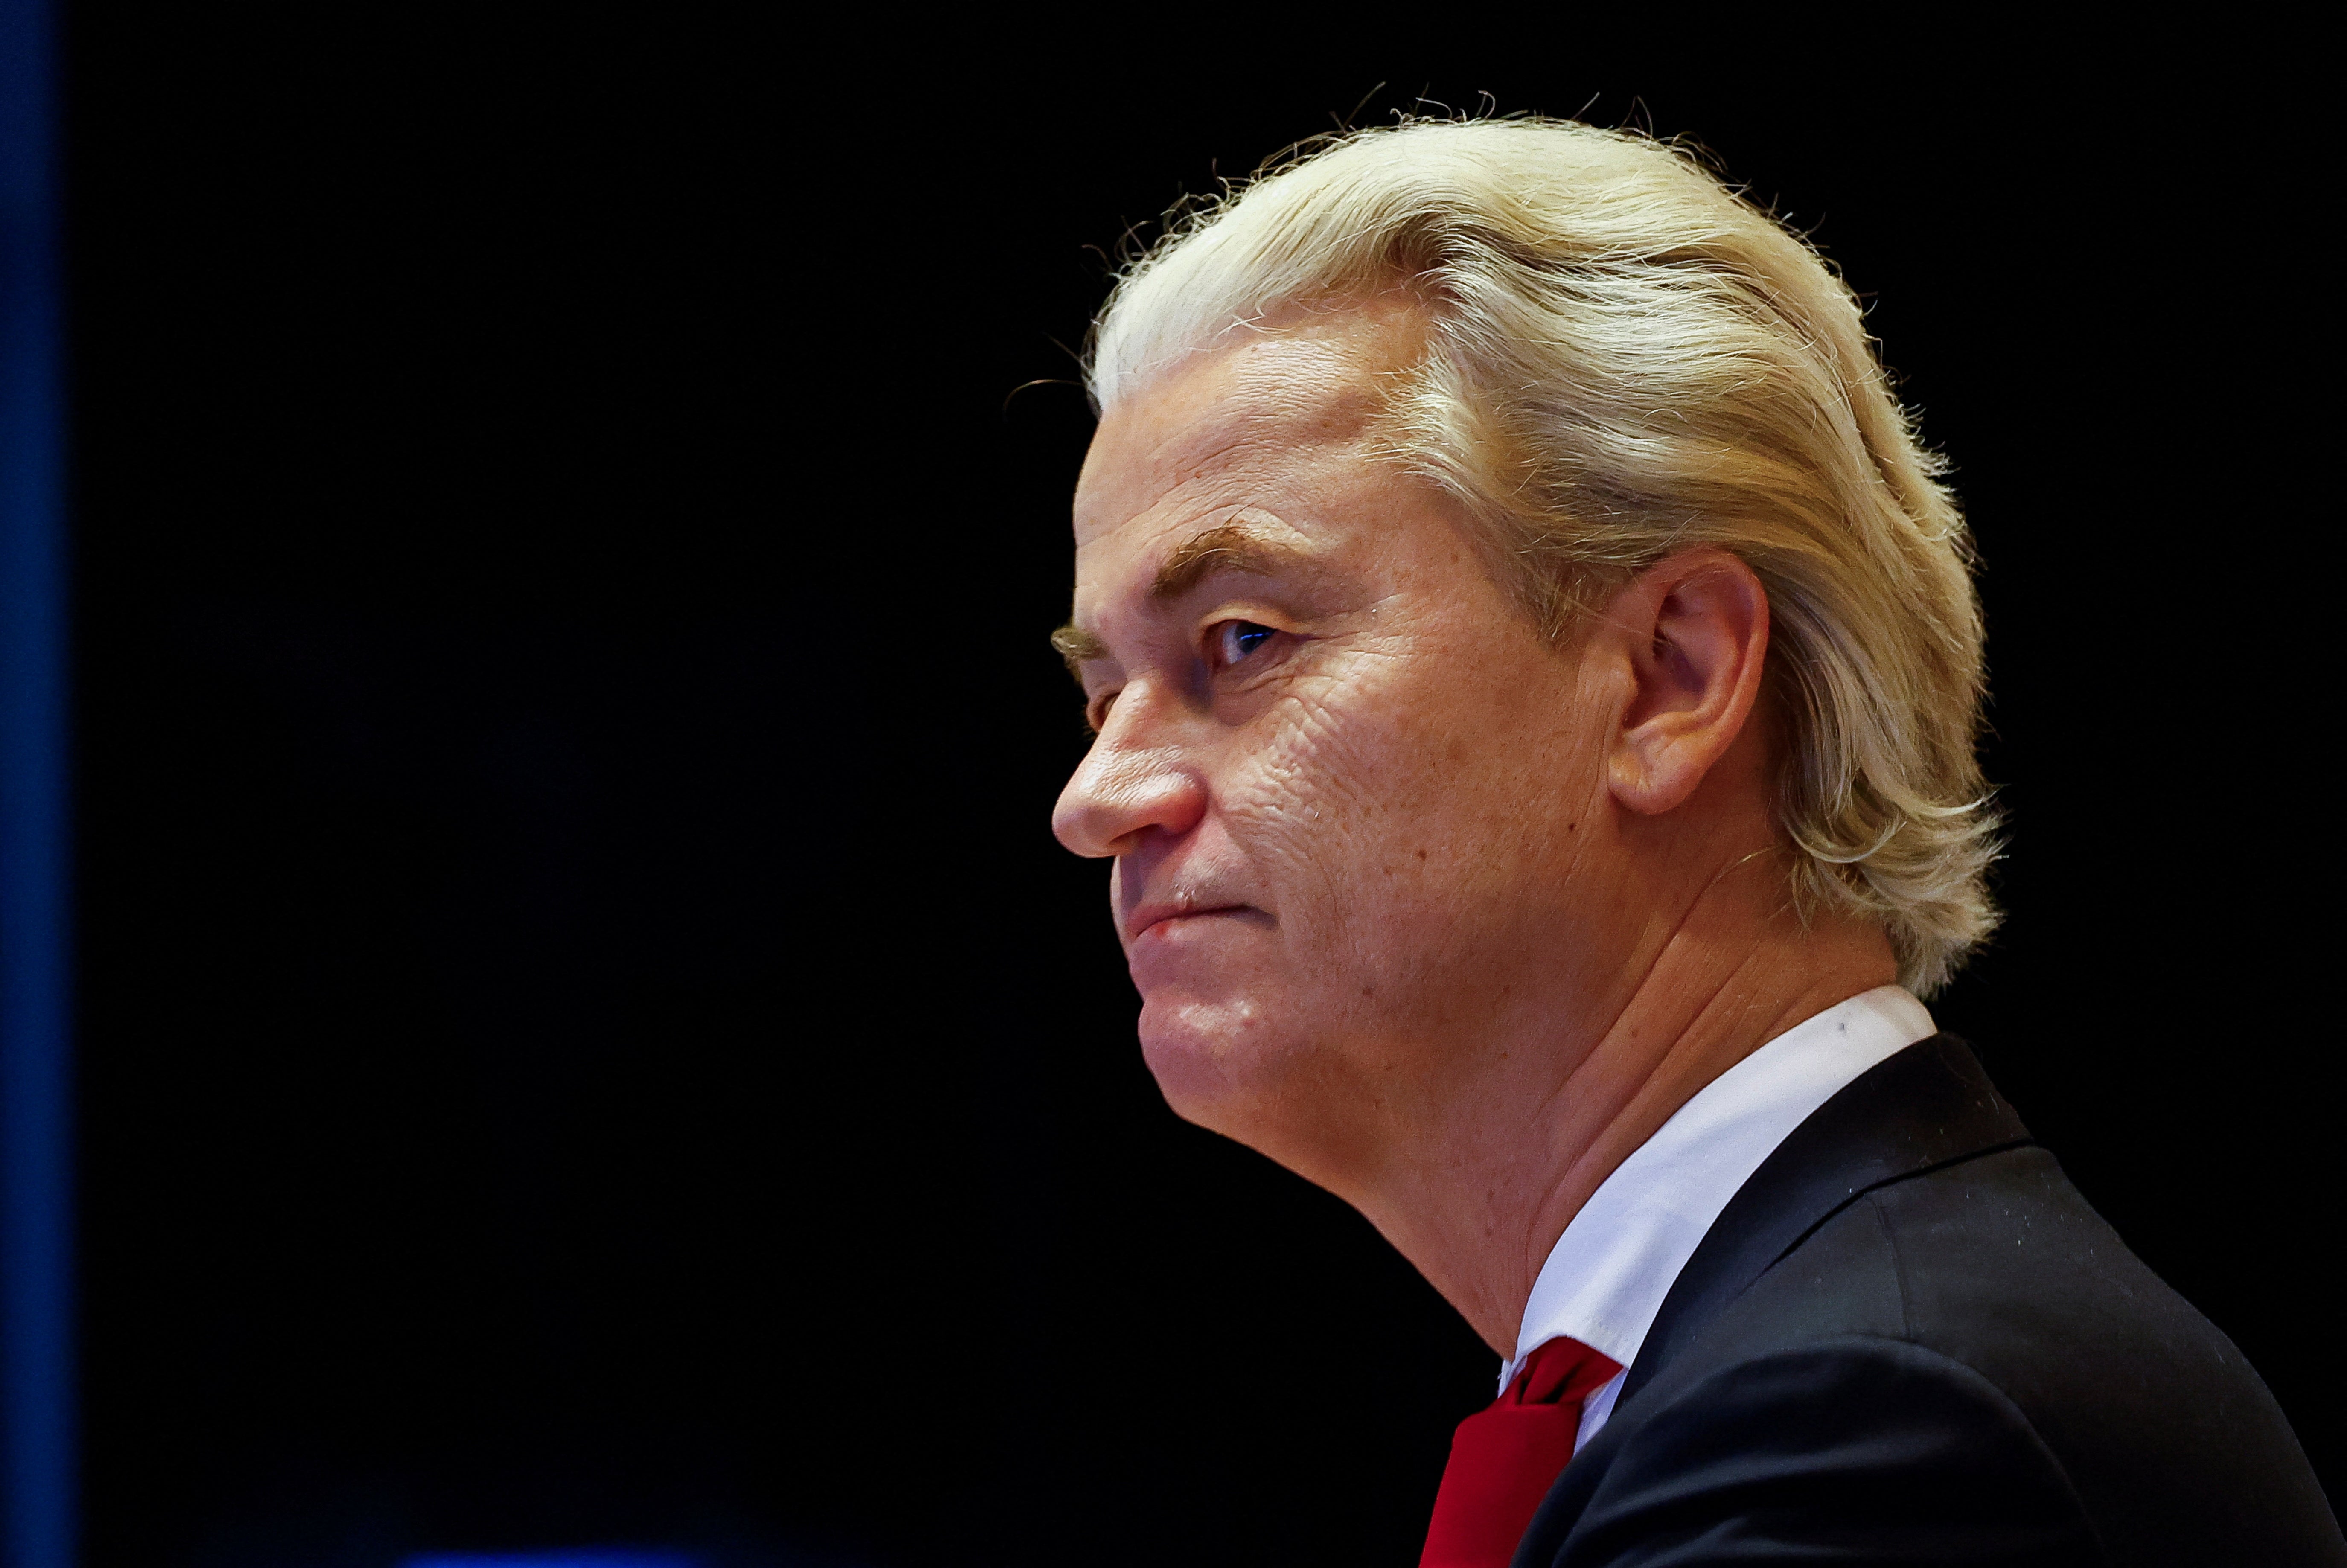 Geert Wilders scored an unexpected victory in the Netherlands after campaigning against an ‘asylum tsunami’